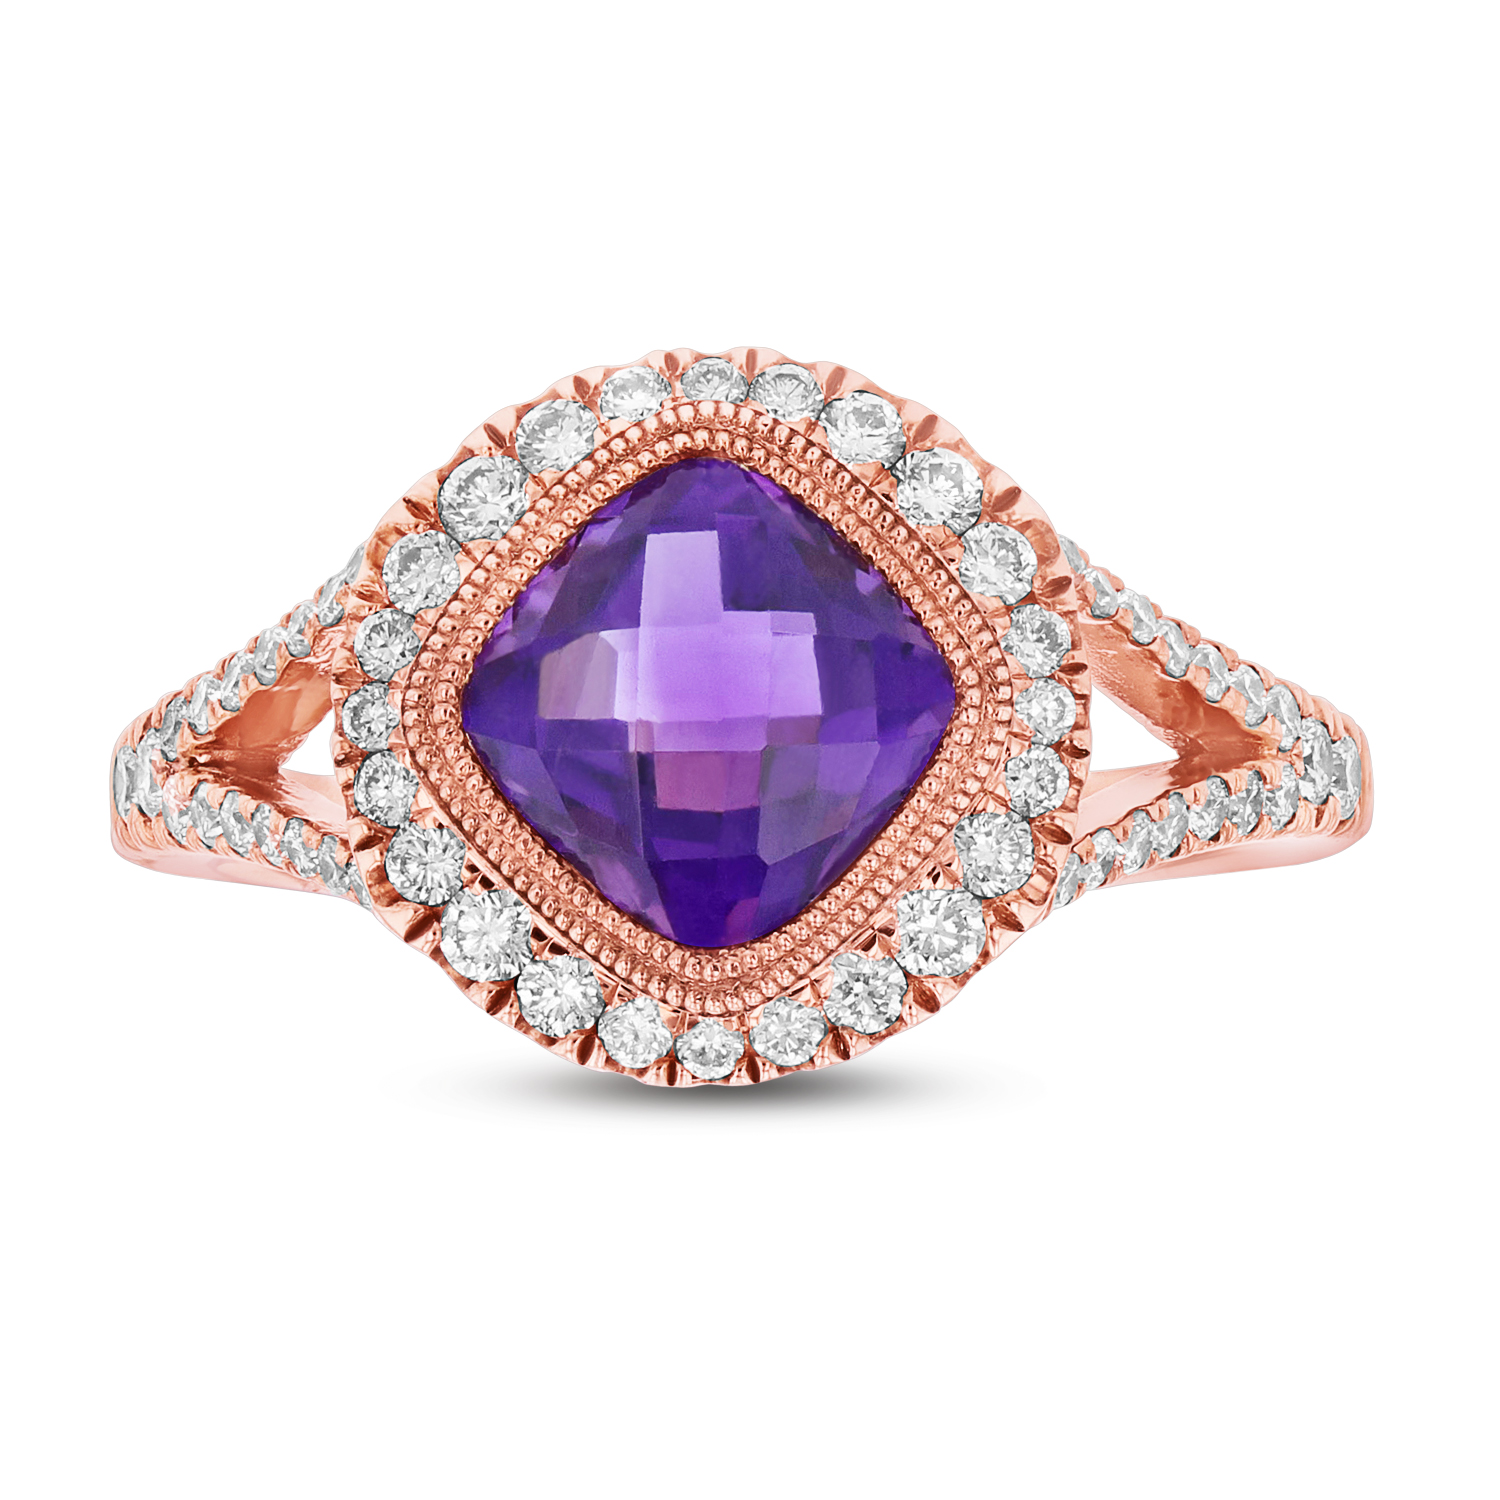 View Diamond and Amethyst ring in 14k Rose Gold